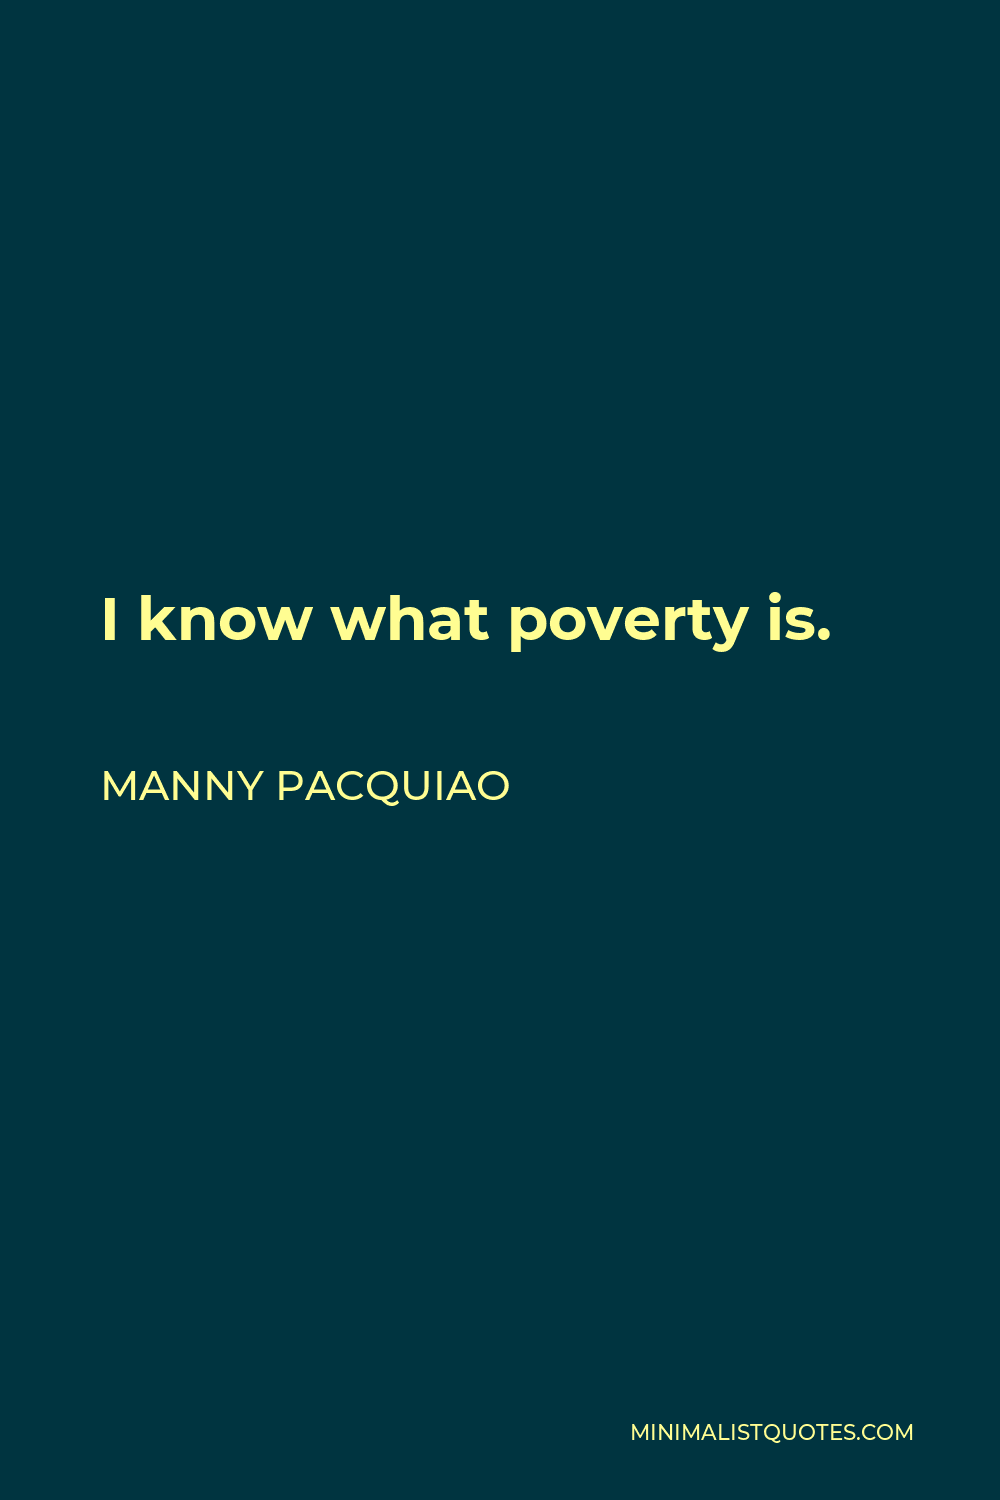 Manny Pacquiao Quote - I know what poverty is.